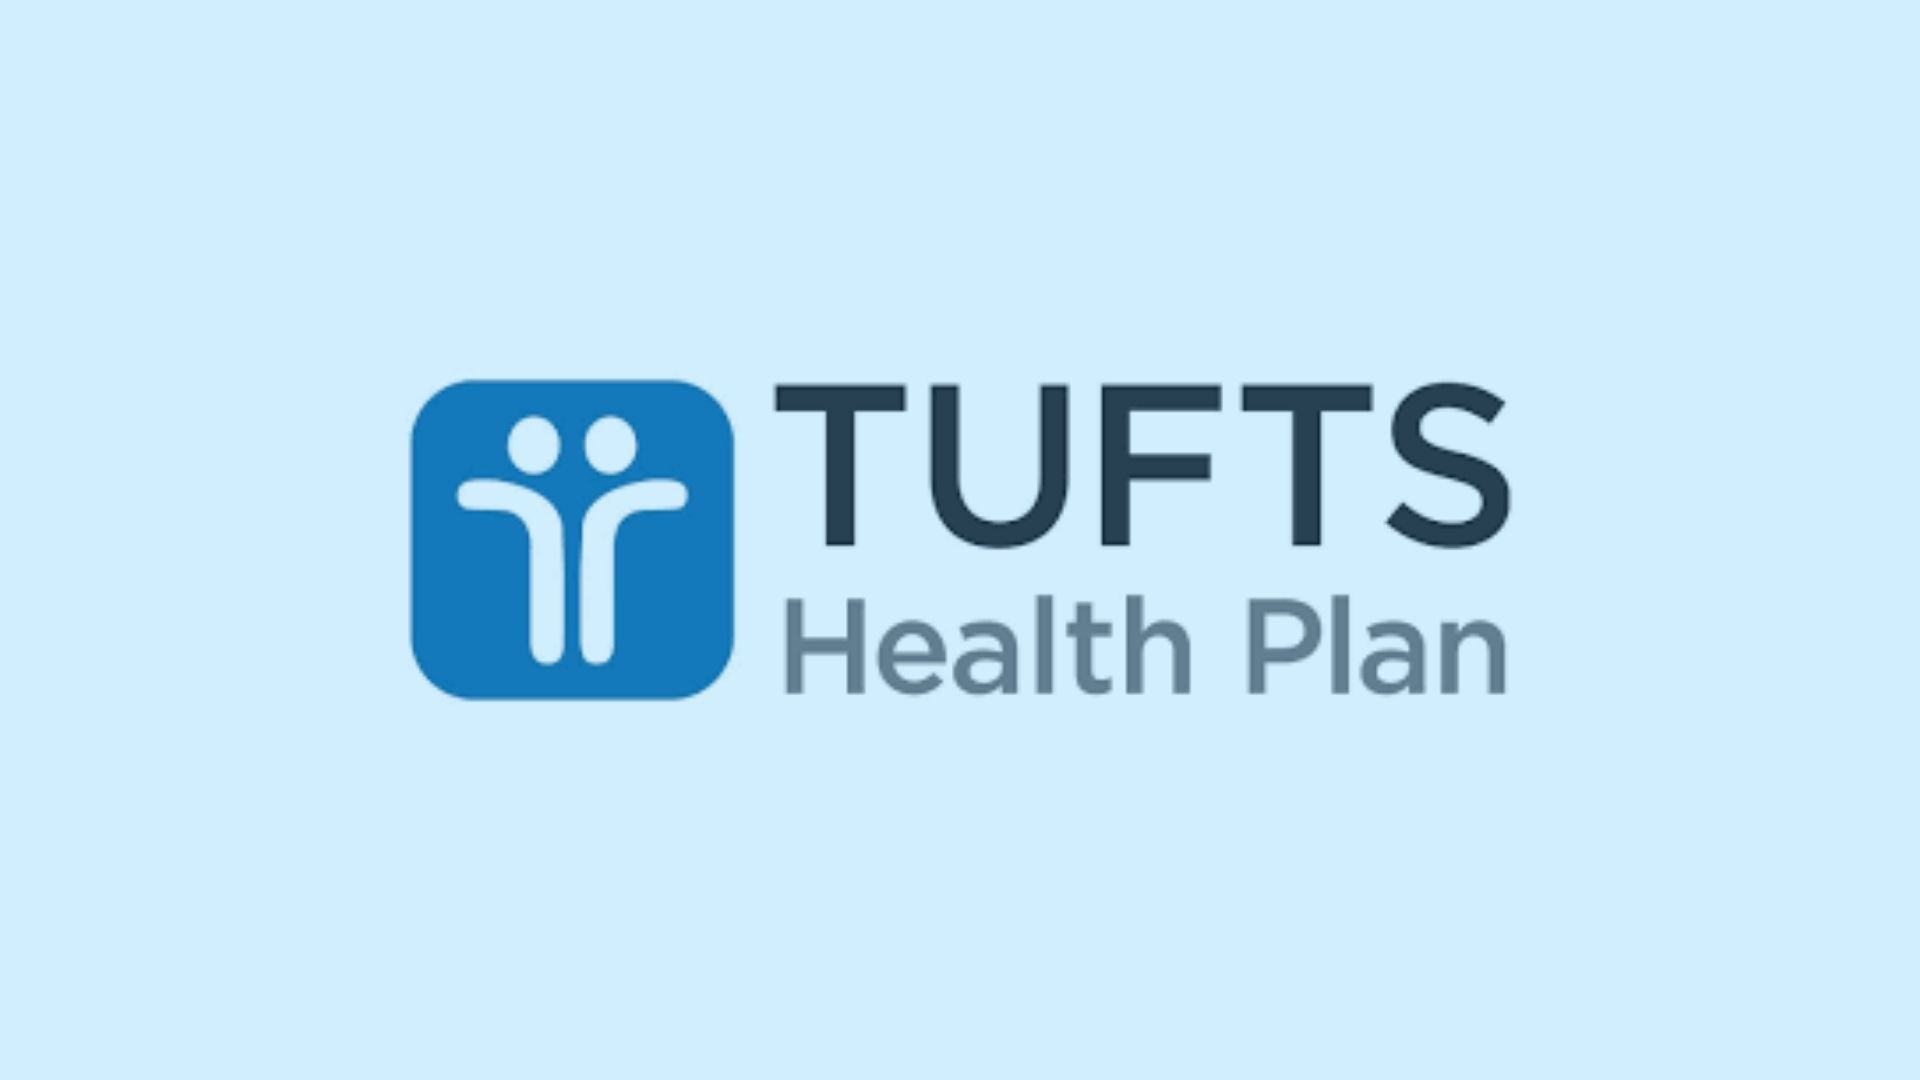 ONE Neighborhood Builders Receives $10,000 In Funding from Tufts Health Plan to Expand High Speed Internet Access in Providence